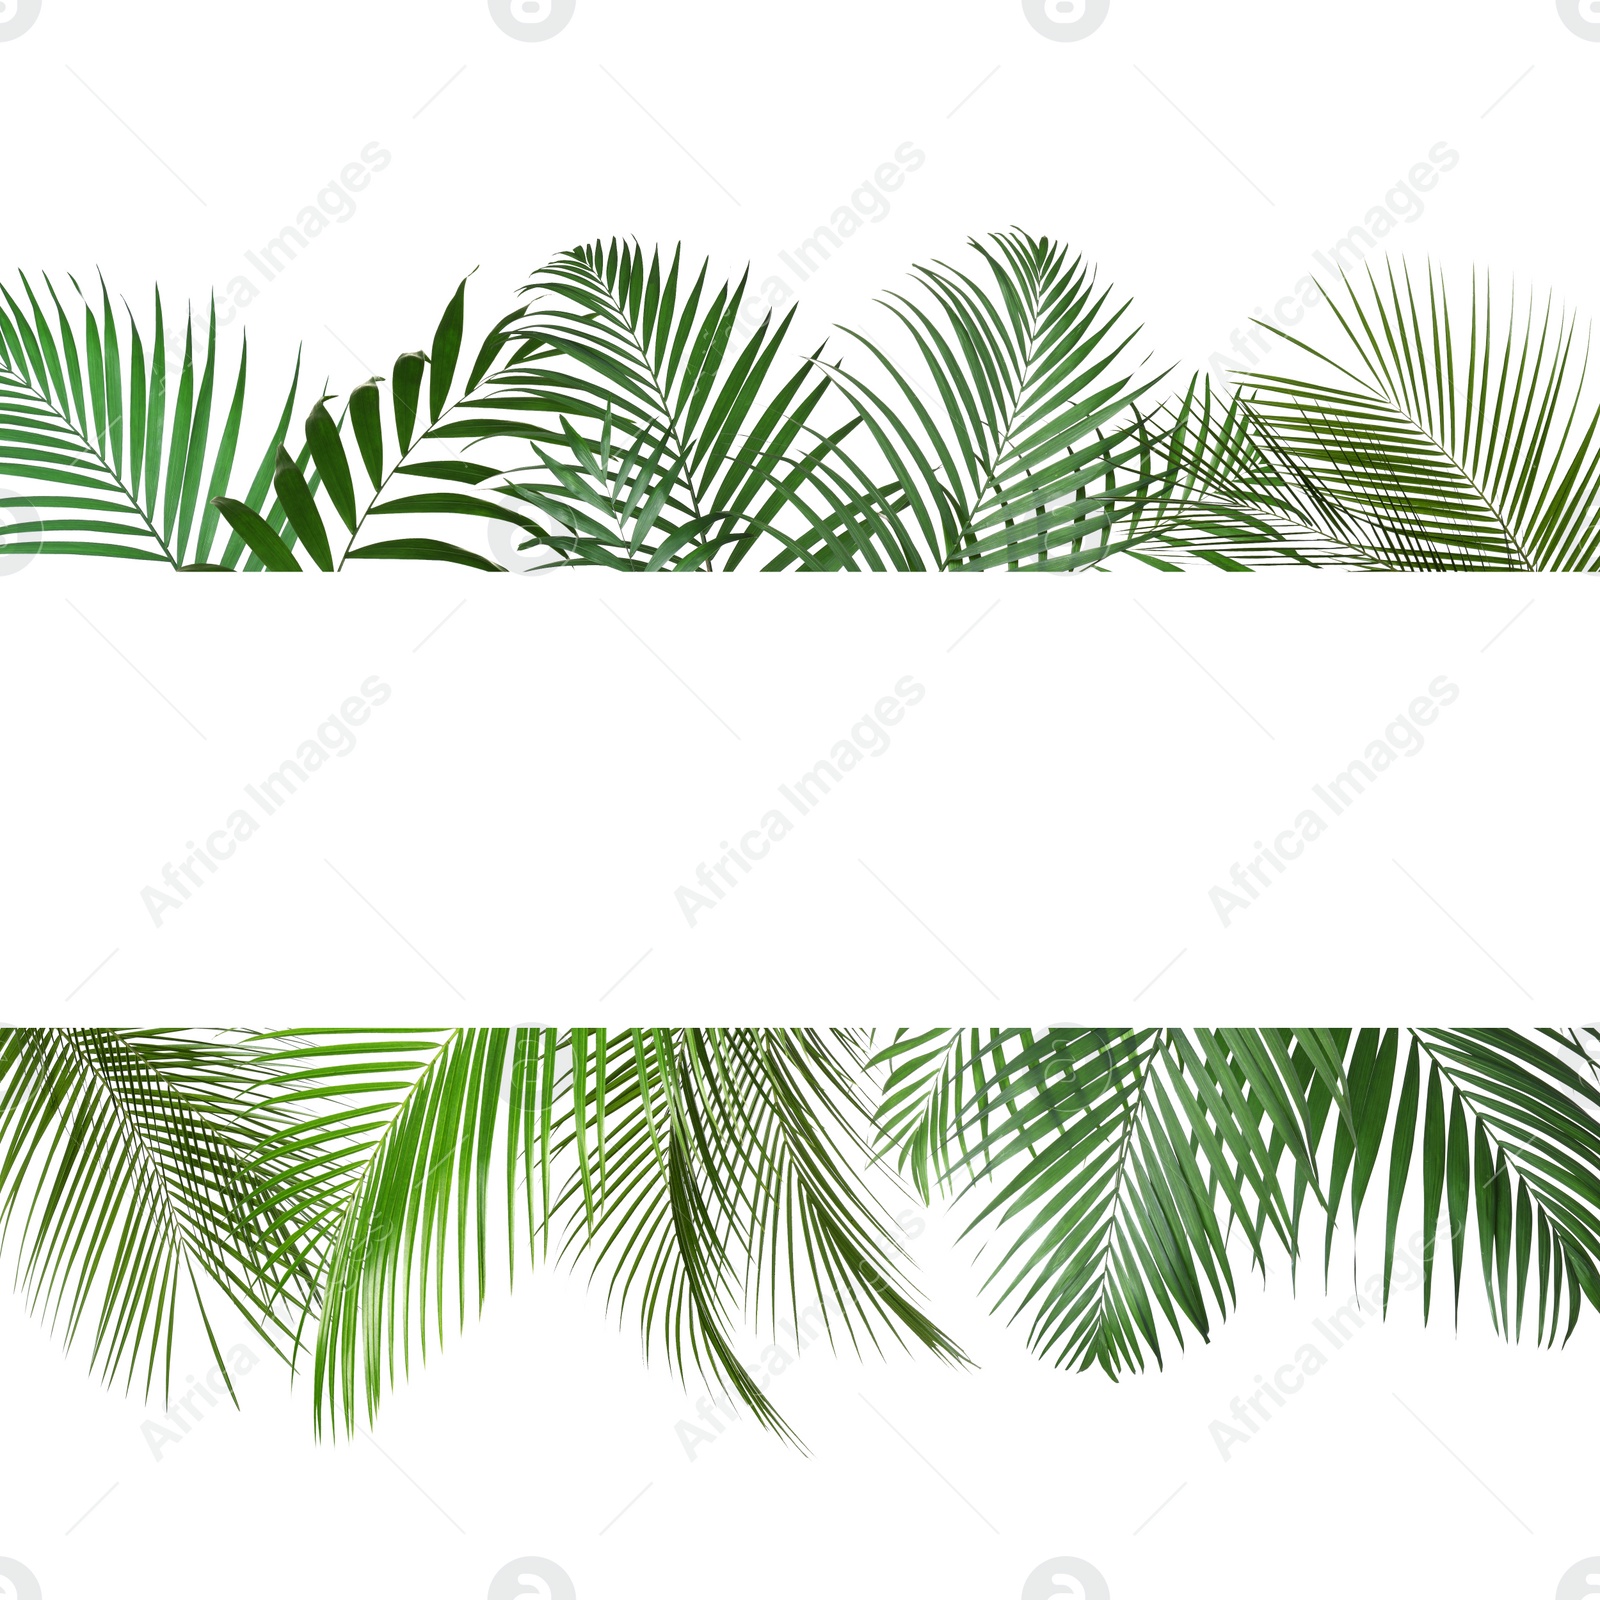 Image of Frame made of beautiful lush tropical leaves on white background, top view. Space for text